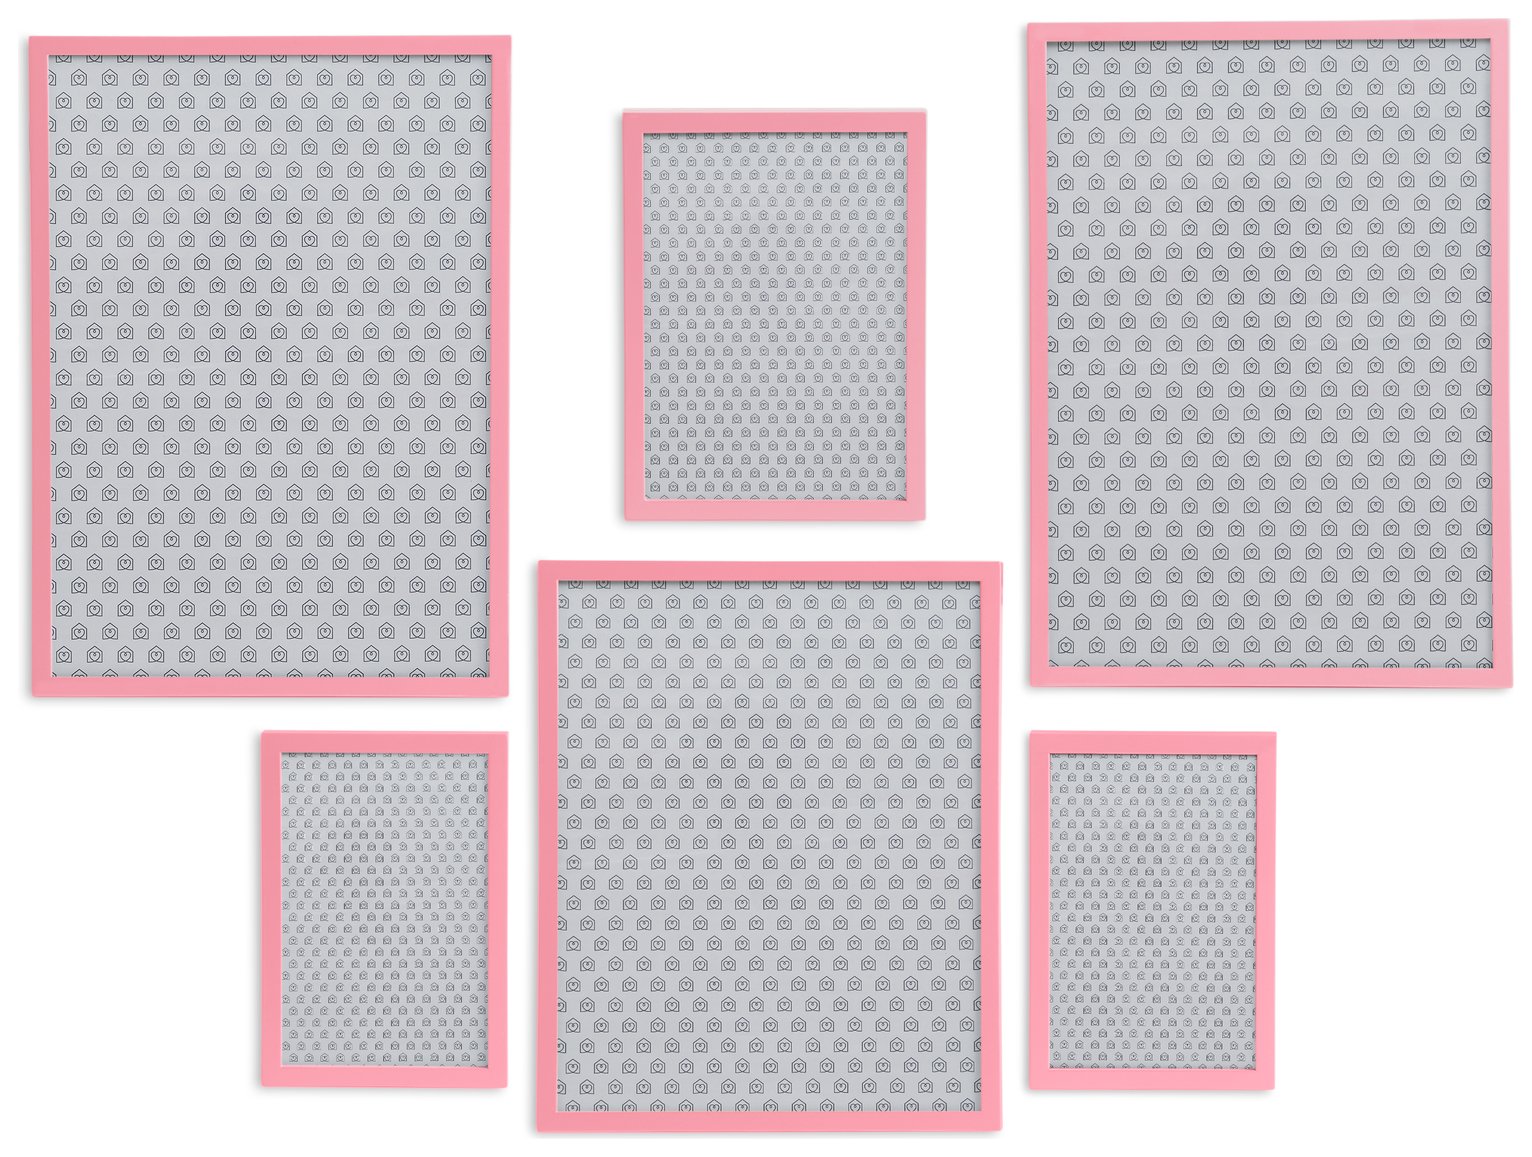 Habitat Kids Picture Wall Frame - Pink - Gallery Set